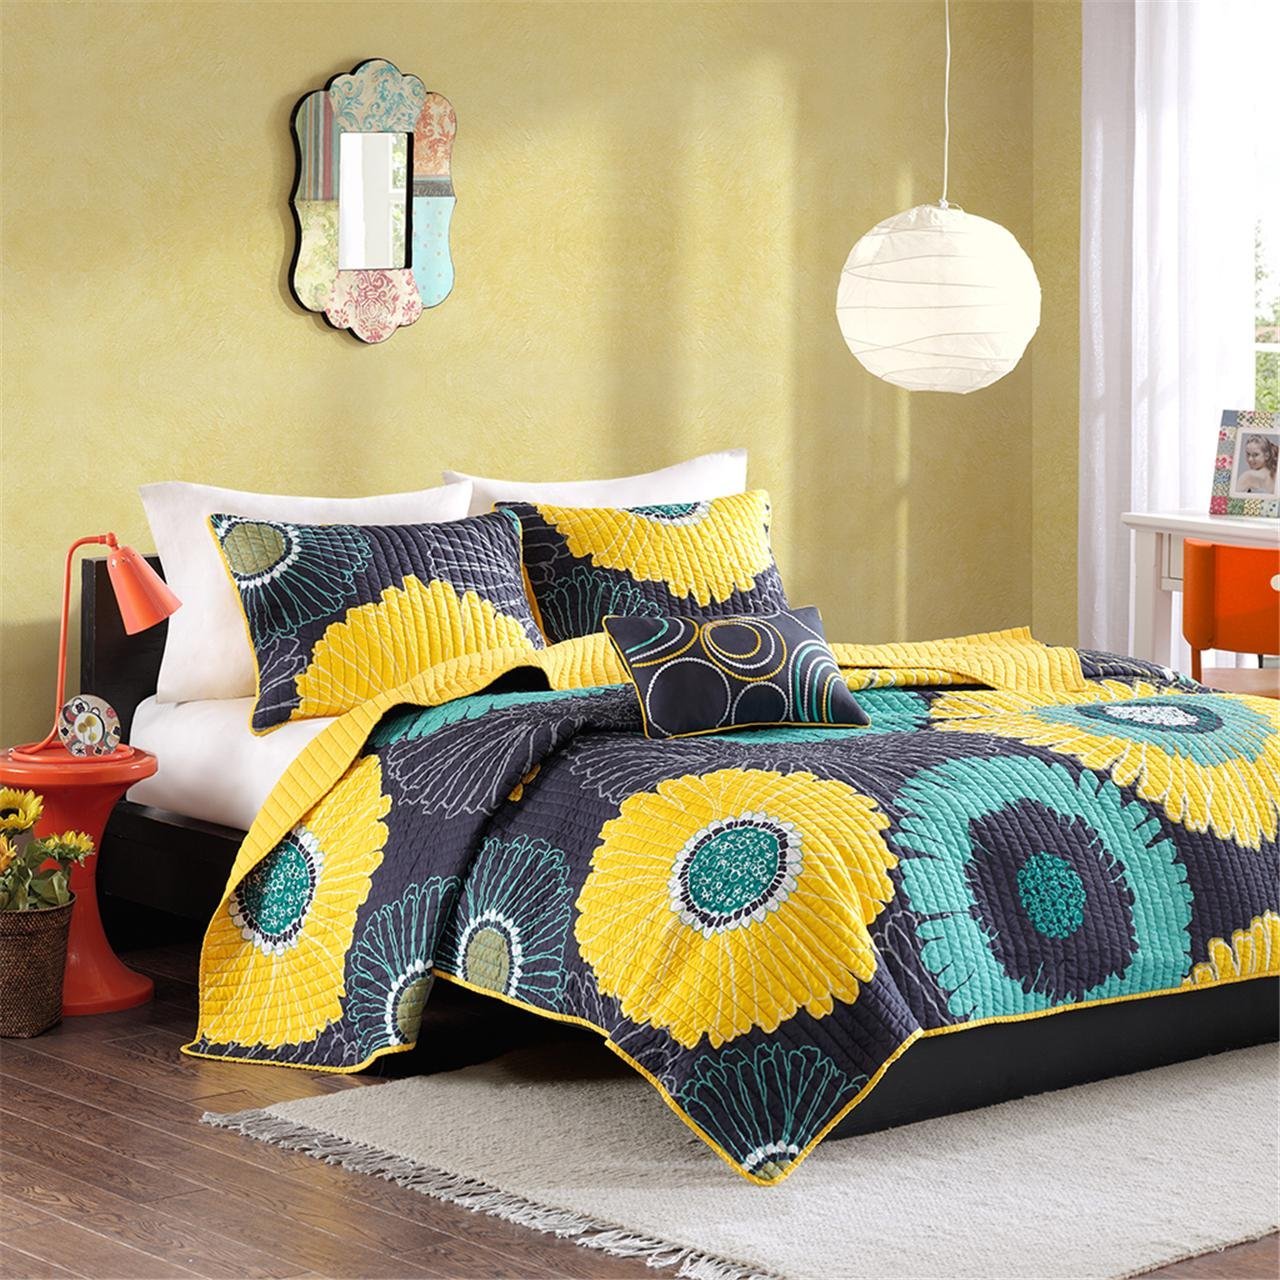 Book Cover MI ZONE Cozy Quilt Set, Casual Modern Vibrant Color Design All Season Teen Bedding, Coverlet Bedspread, Decorative Pillow, Girls Bedroom Décor, Full/Queen, Alice Yellow Flower 4 Piece Alice Yellow Full/Queen